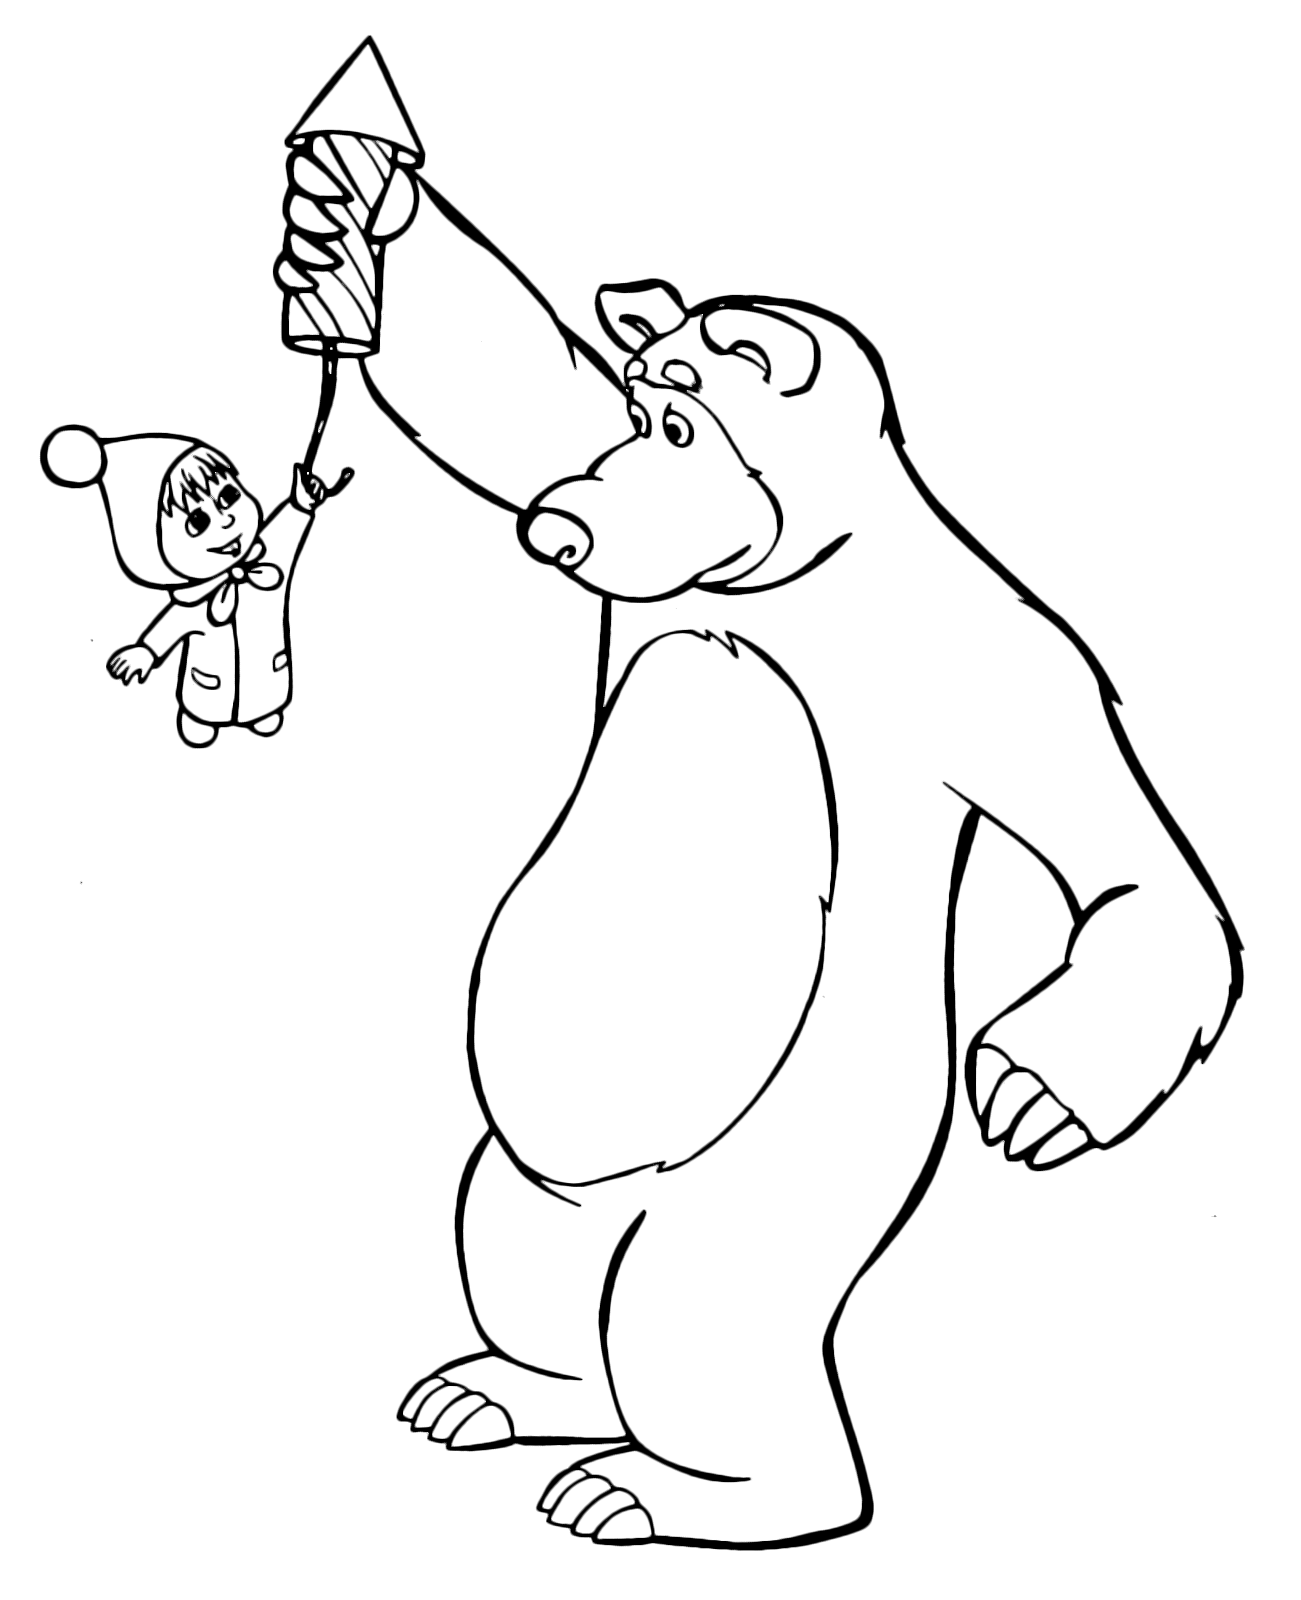 Coloring Pages : Nick Jr Masha And The Bear Games Youtube ...